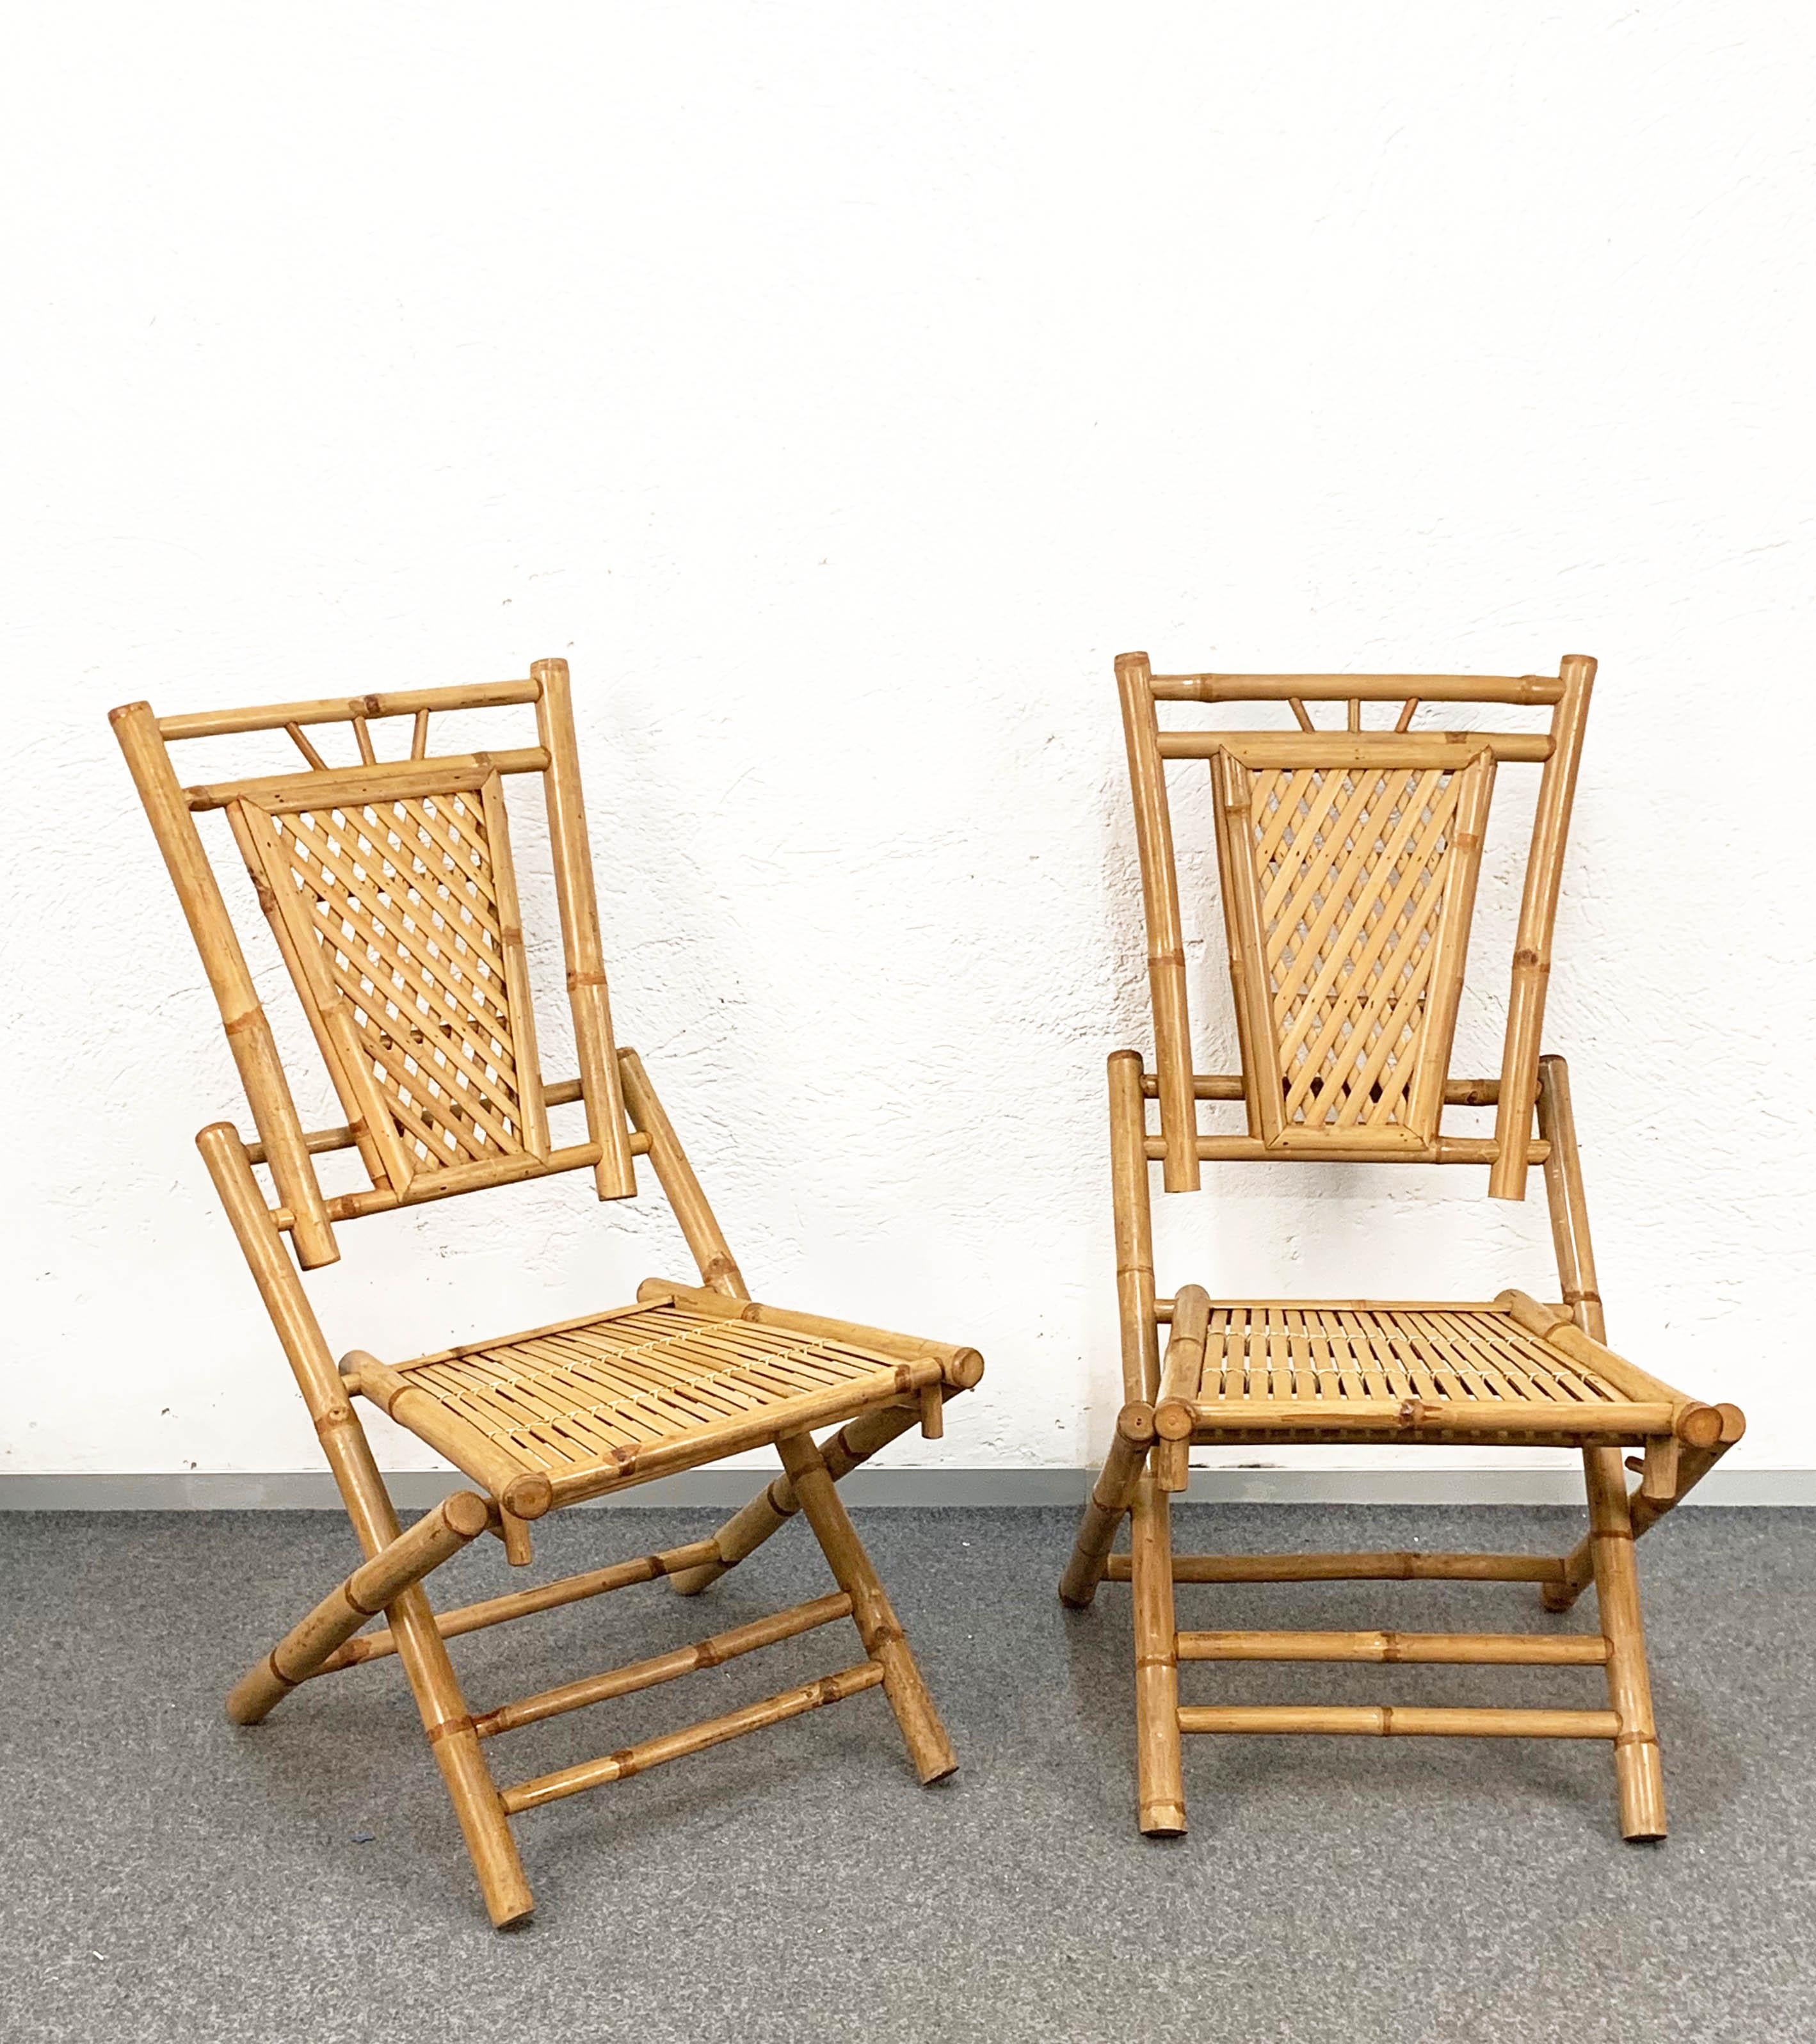 Midcentury Bamboo and Rattan Italian Foldable Table and Four Chairs, 1960s For Sale 8